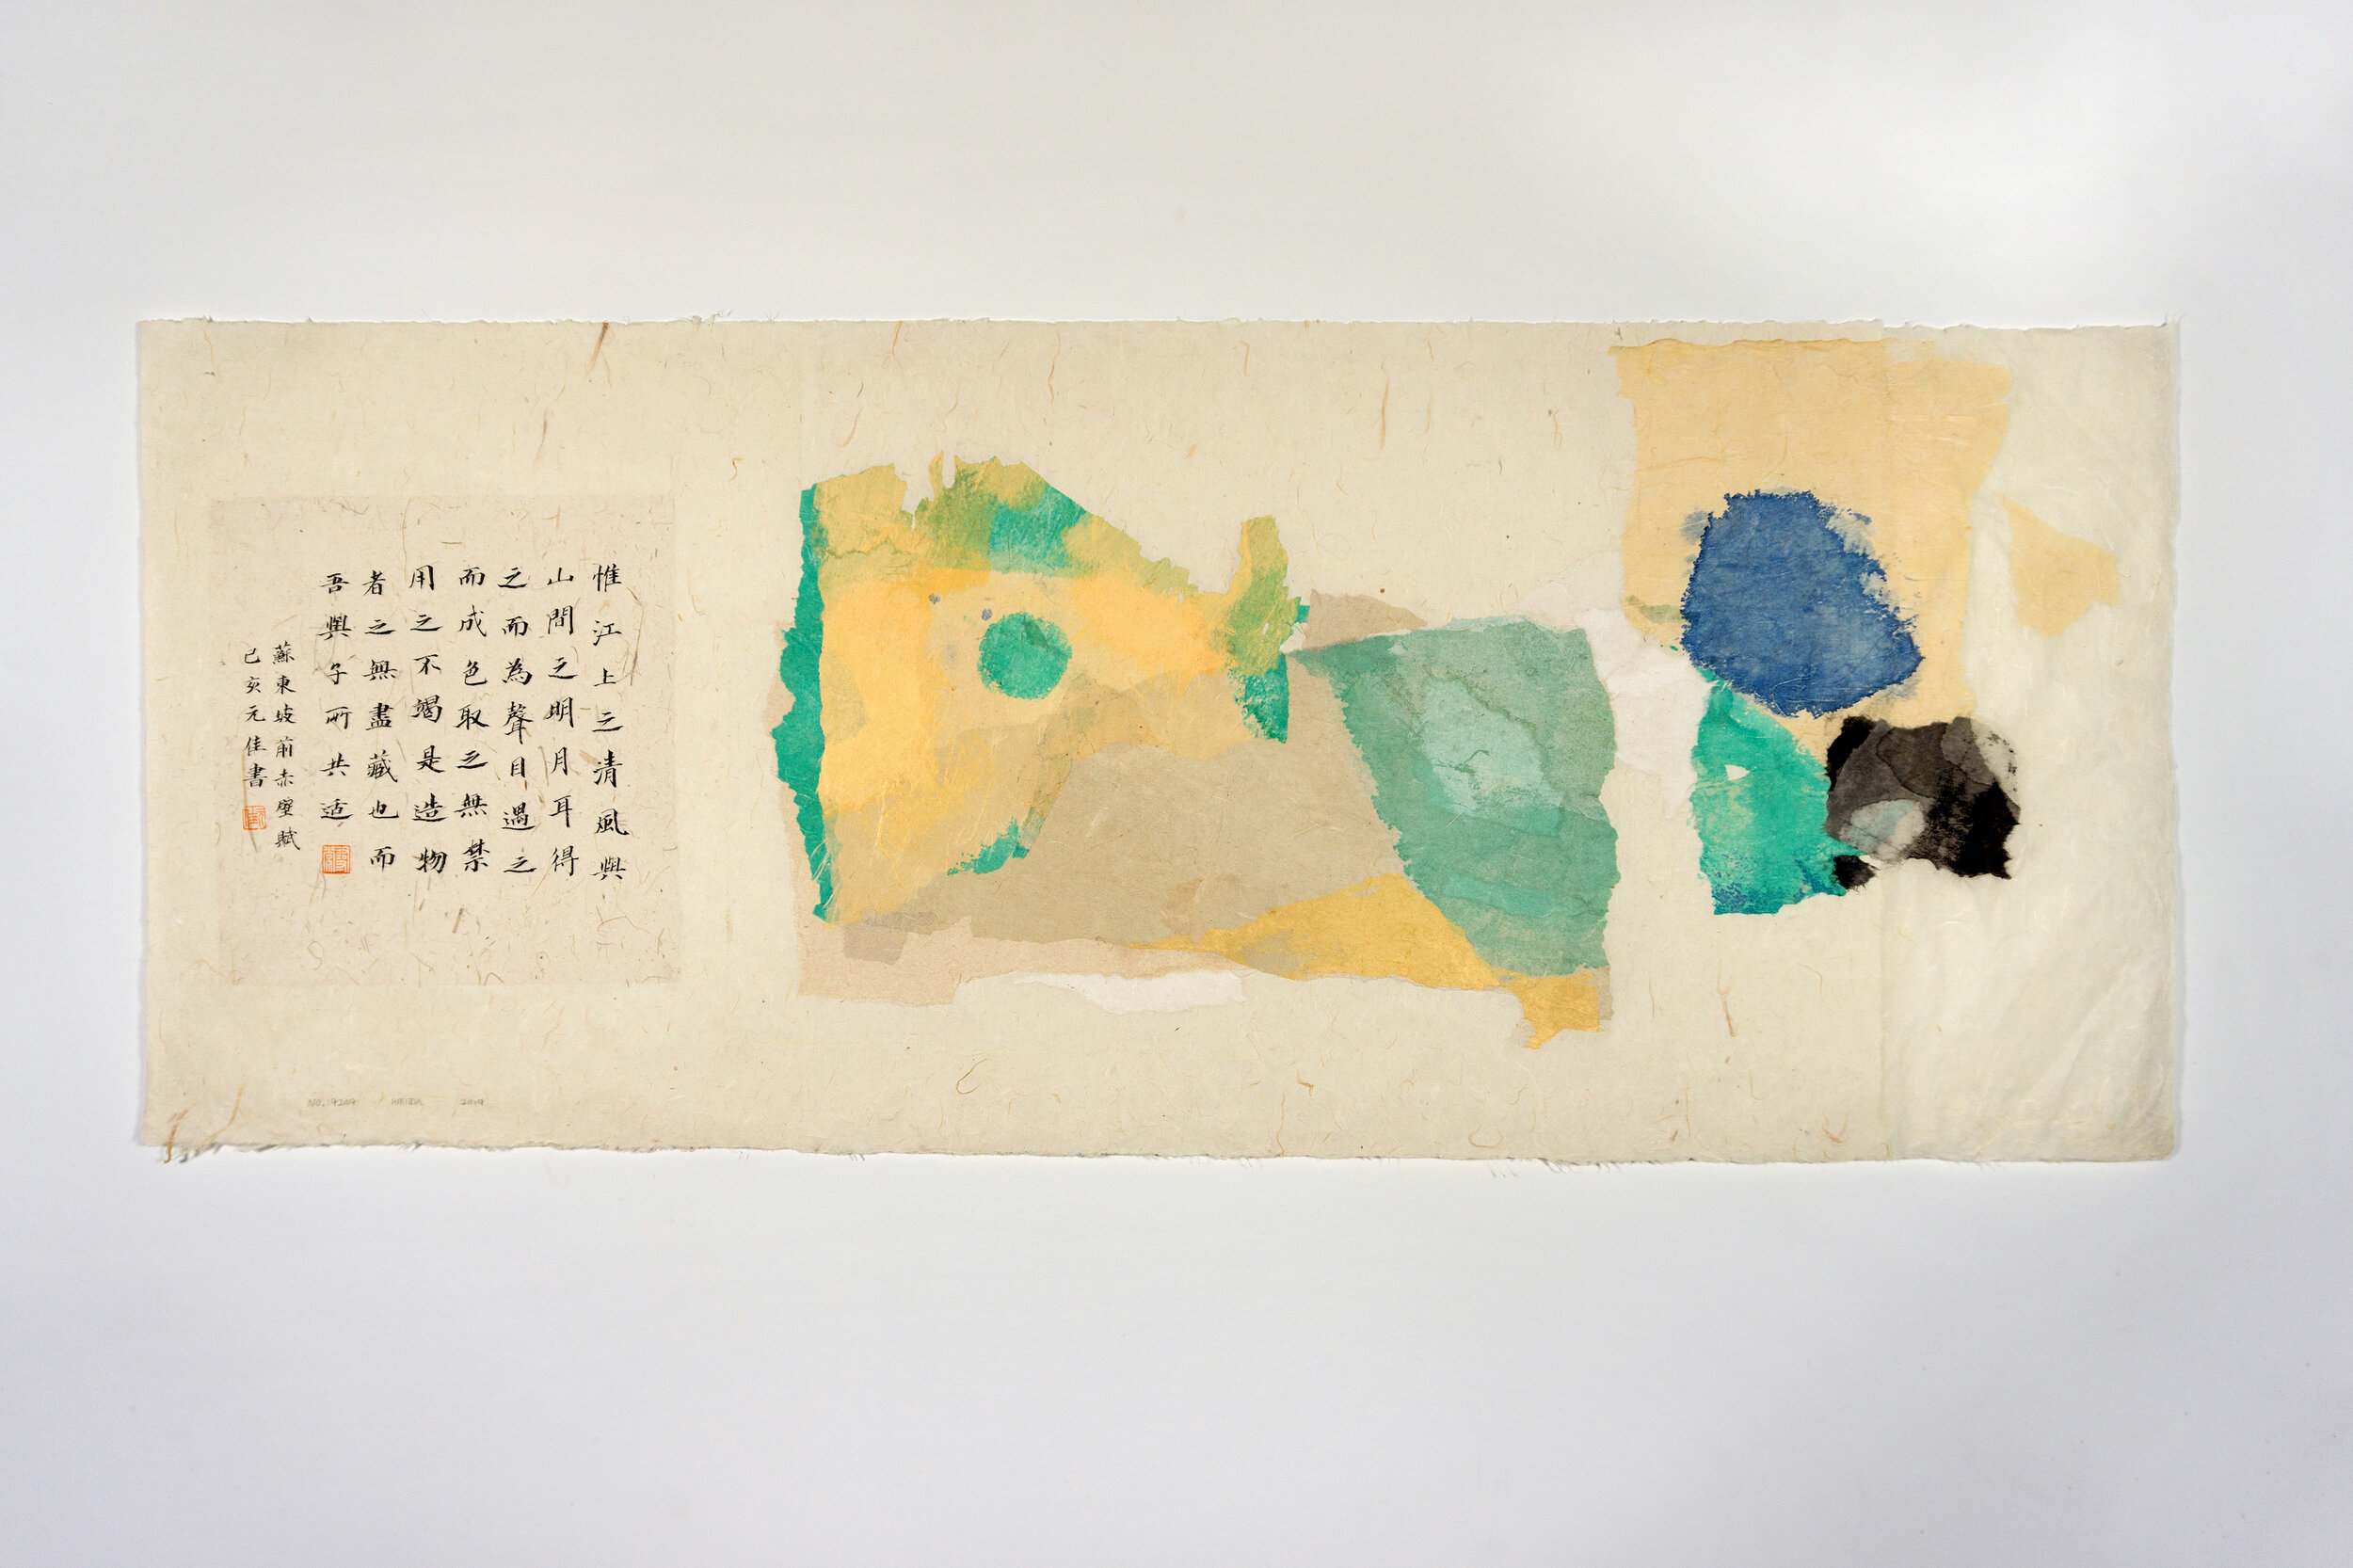  Wei Jia,  No. 19249,  2019. Gouache, ink and Xuan paper, collage on paper, 16 1/2 x 40 1/8 inches ©Wei Jia, courtesy Fou Gallery   